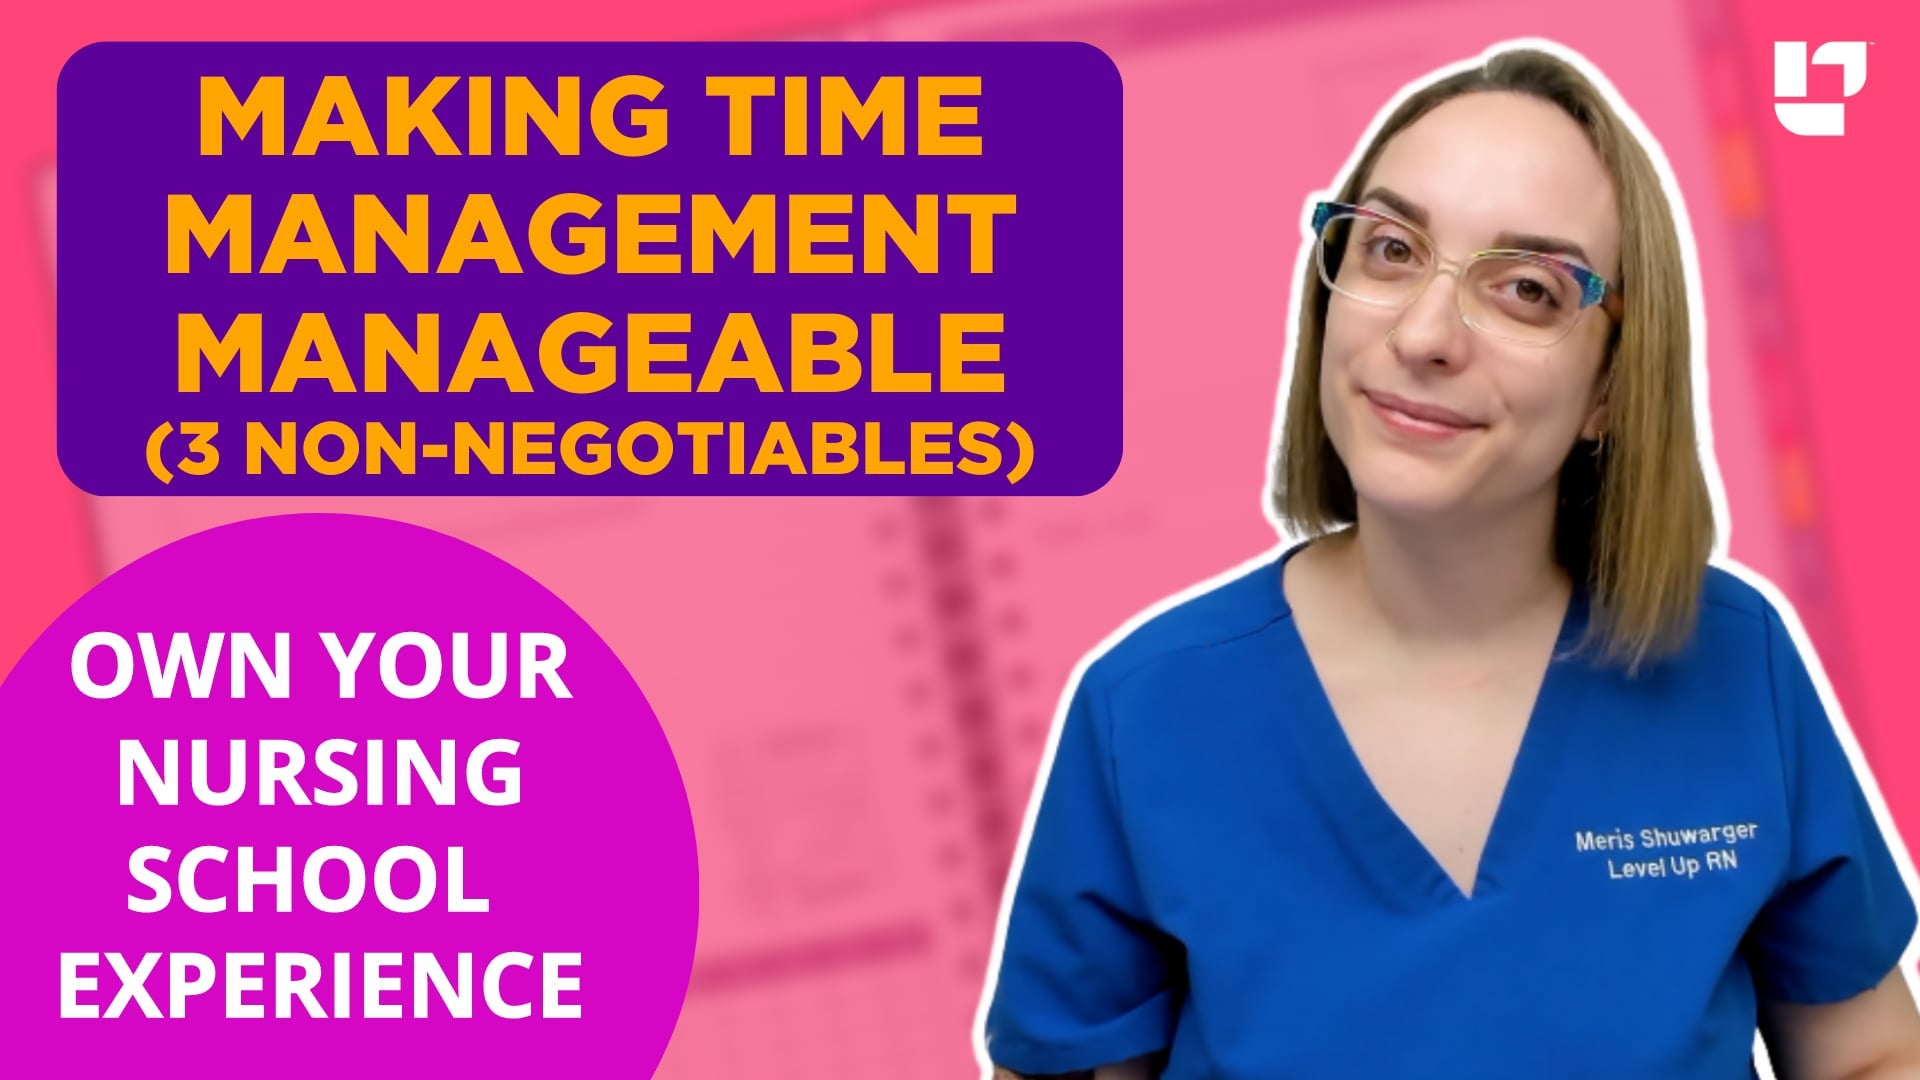 Making Time Management Manageable: the Power of the Three Non-Negotiables - LevelUpRN